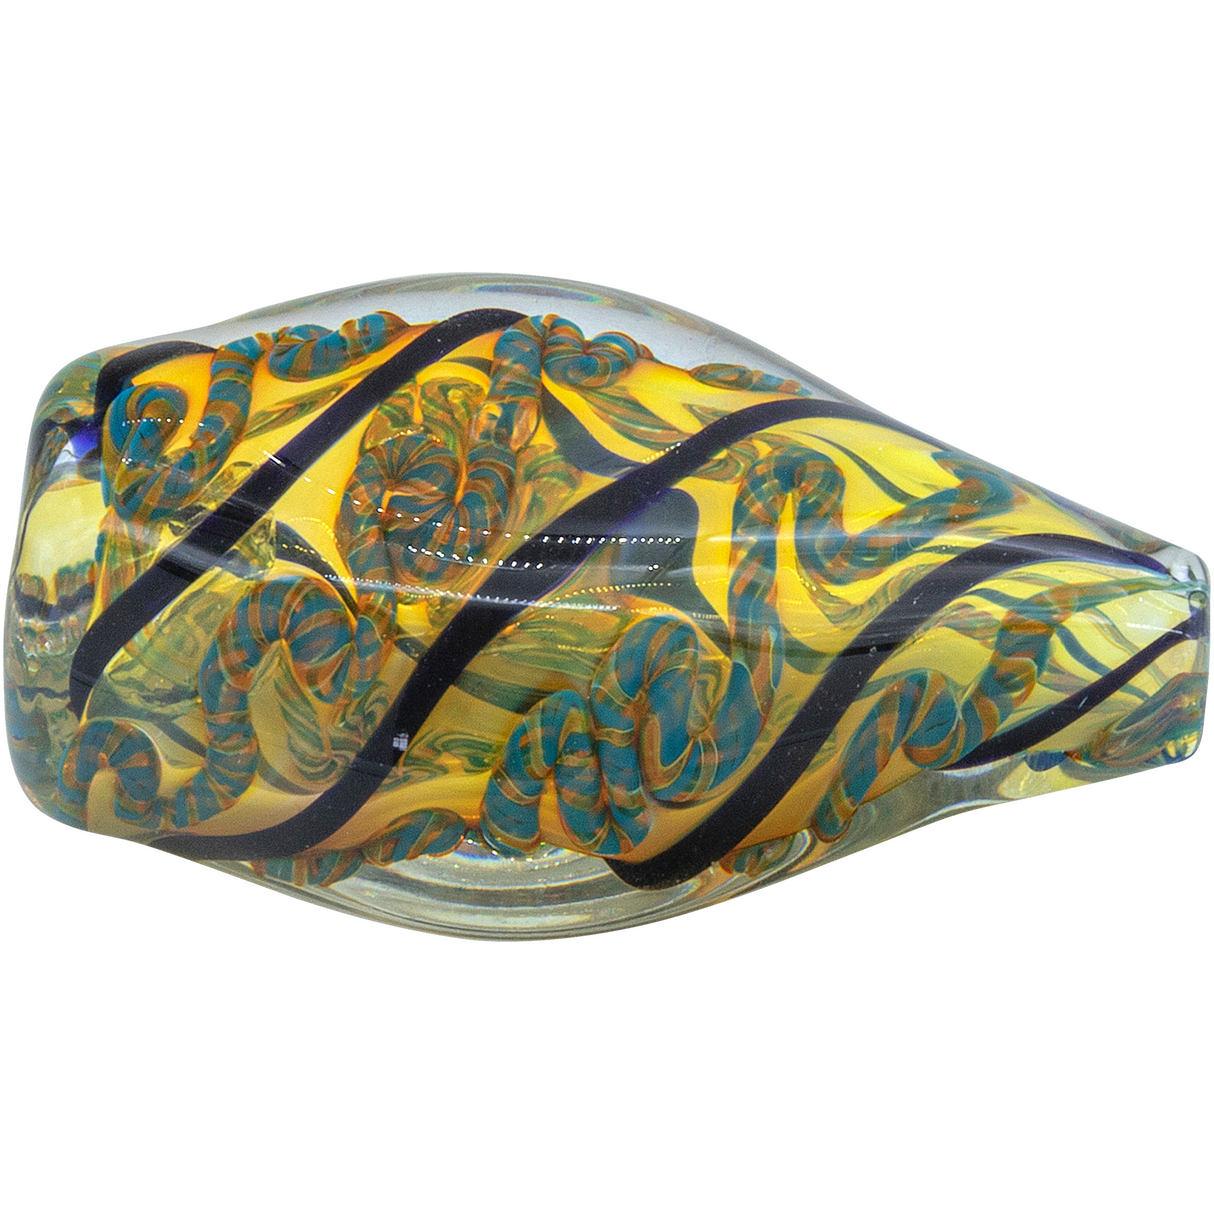 LA Pipes 'Skipping Stone' Inside-Out Chillum in Mixed Colors, 2.5-inch Borosilicate Glass